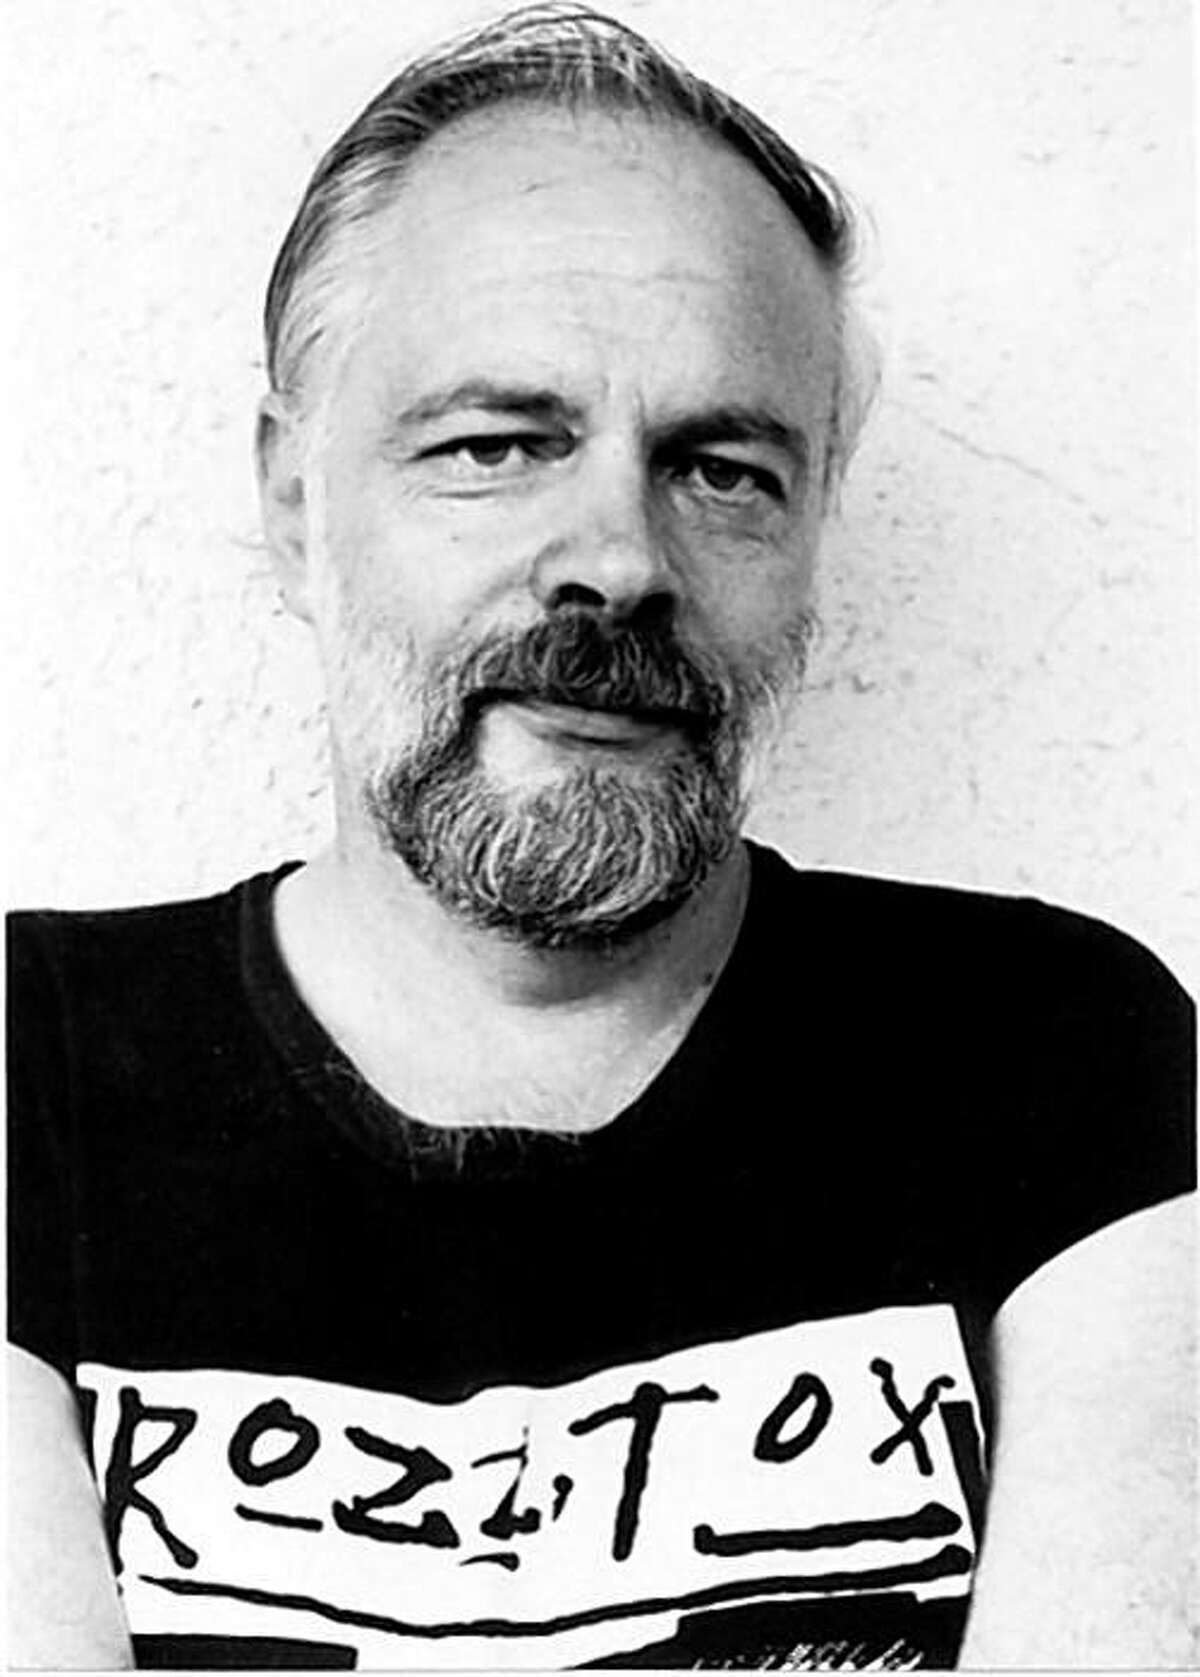 1981 photo of sci-fi writer Philip K. Dick who inspired such films as Blade Runner, Minority Report, Total Recall and paycheck.